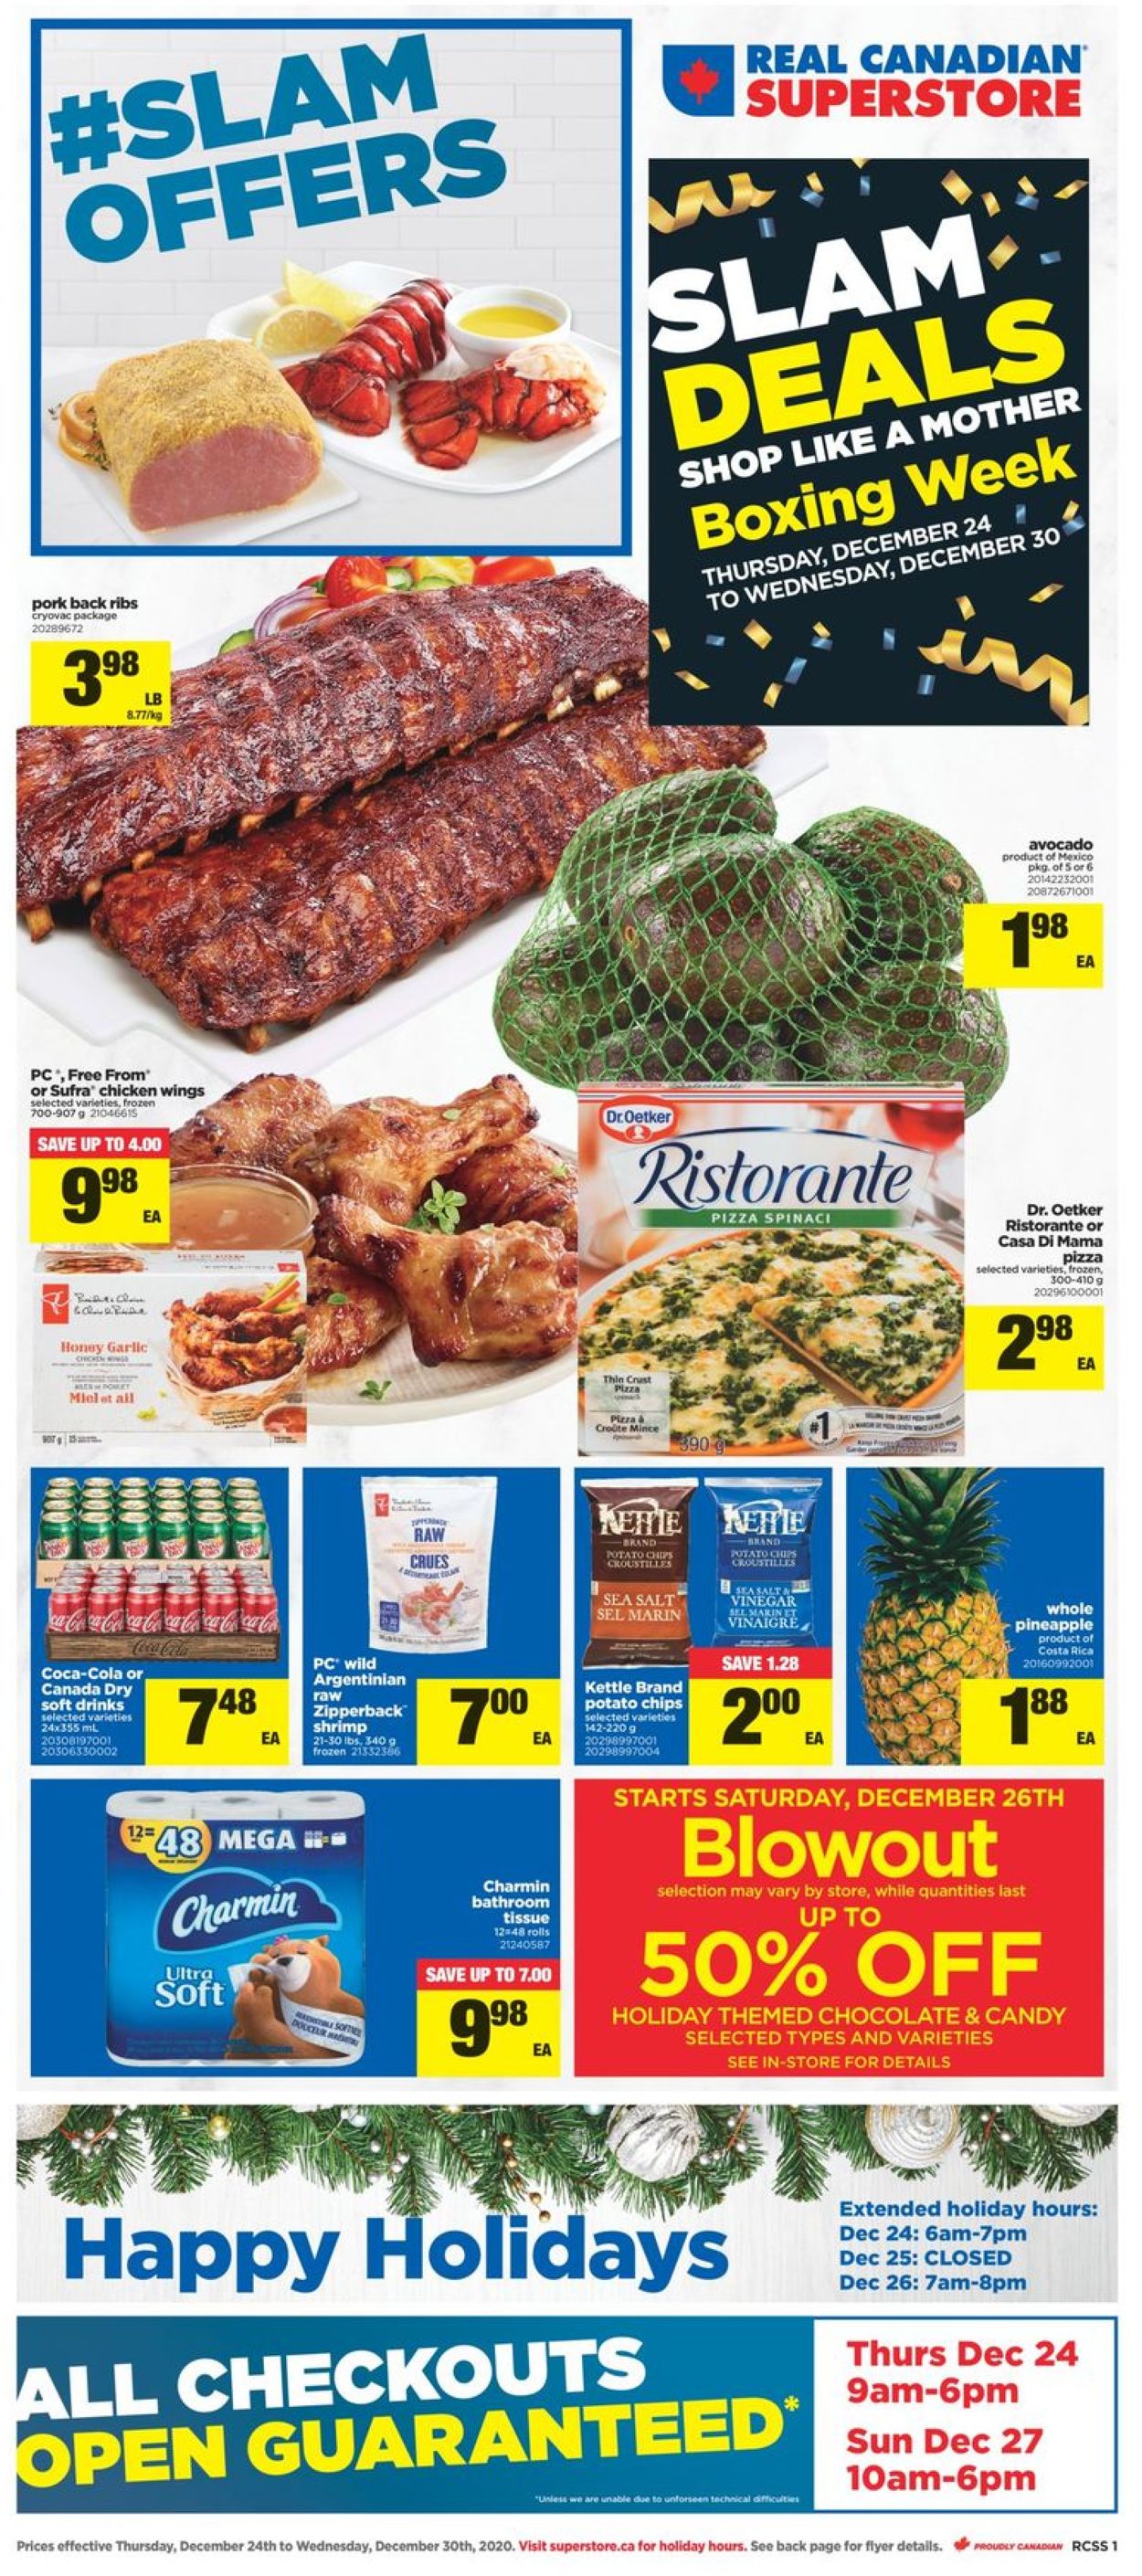 Real Canadian Superstore - Boxing Week 2020 Flyer - 12/24-12/30/2020